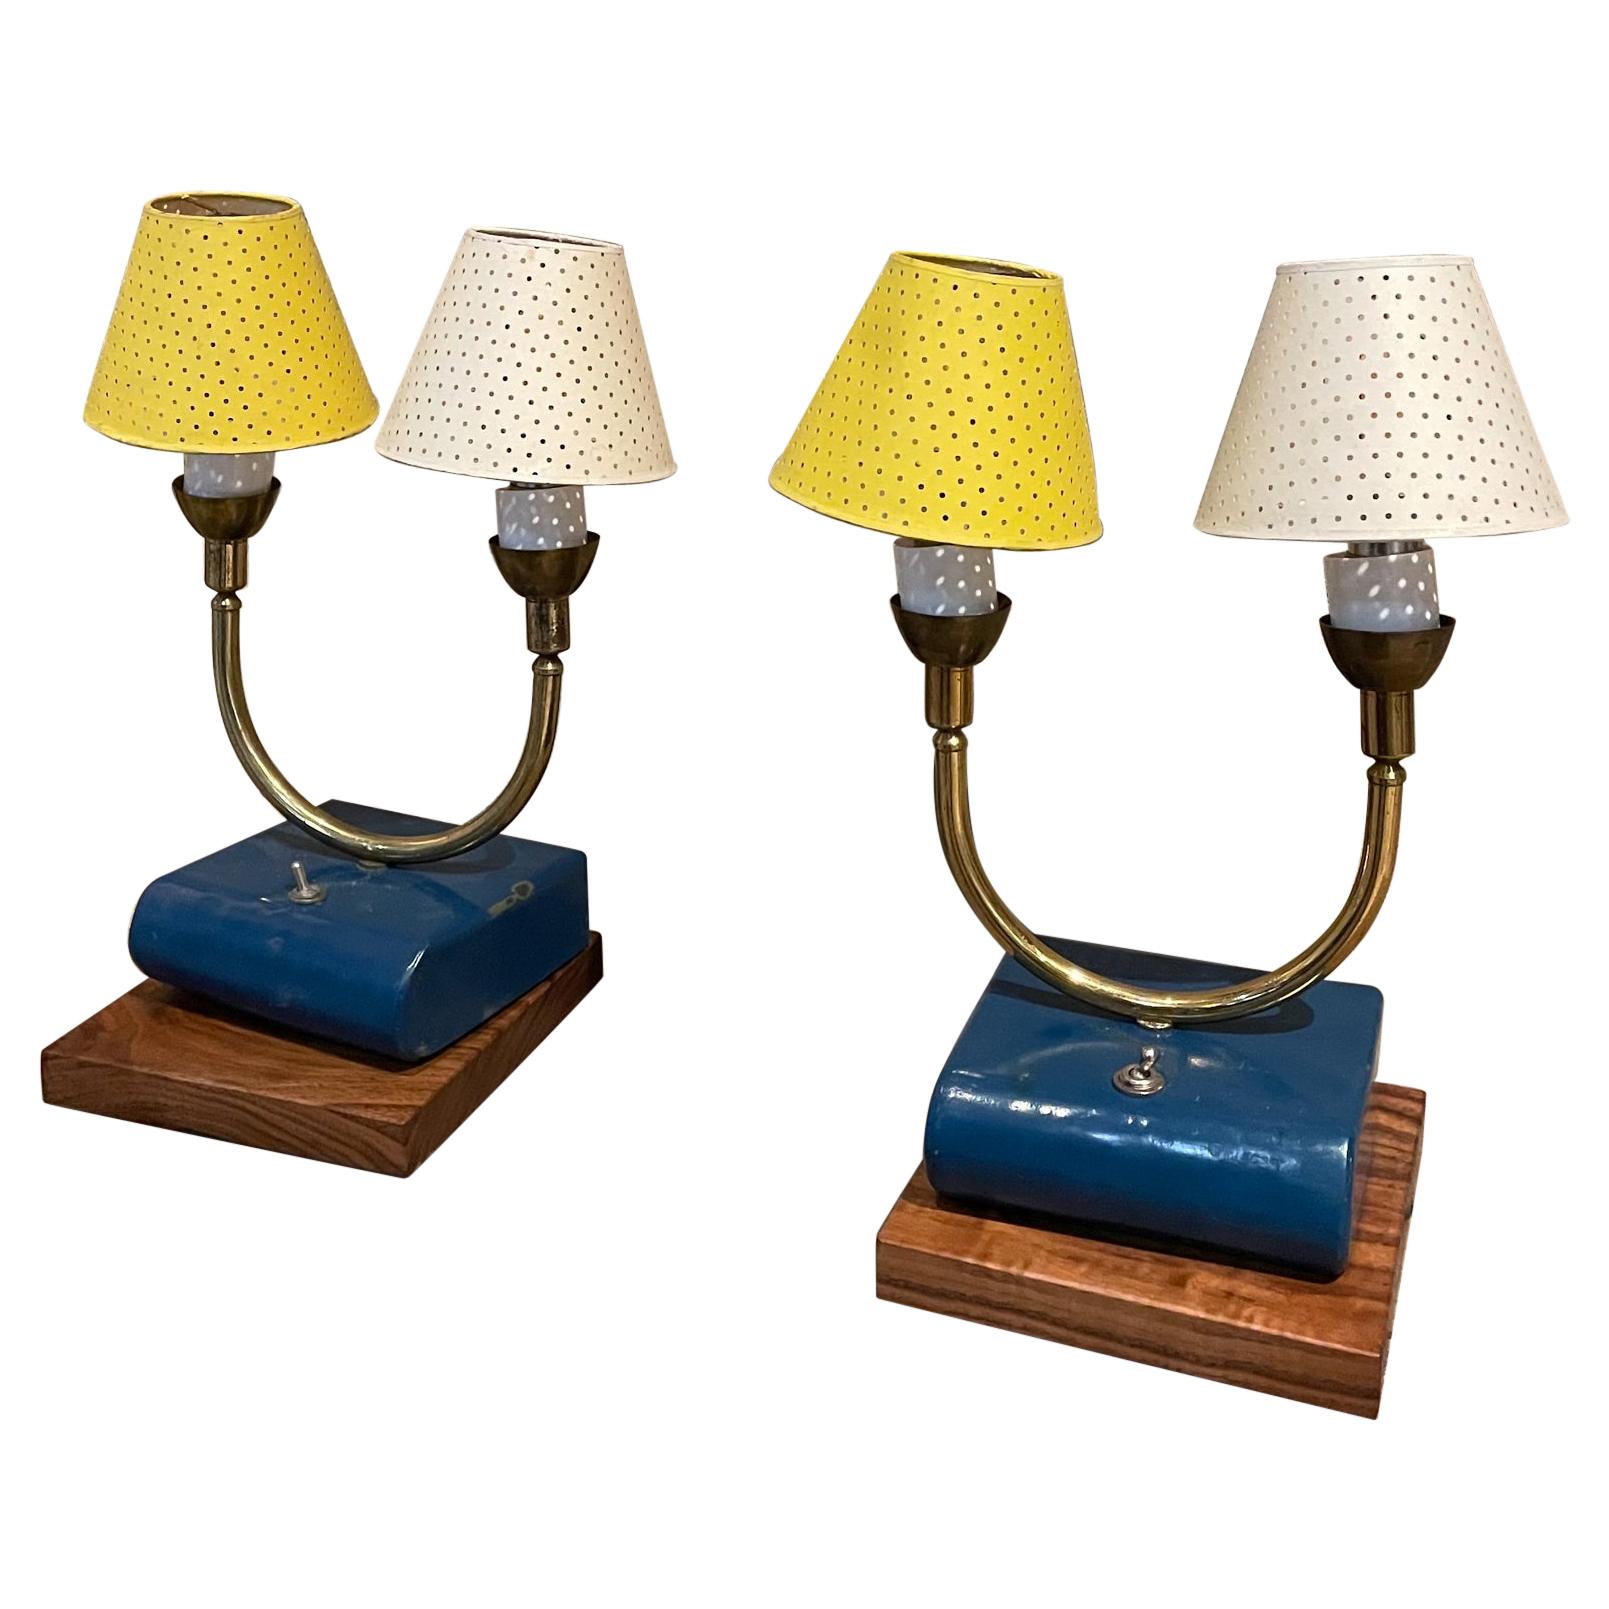 Pair of Totally French Vintage Table Lamps in Blue White & Yellow France, 1950s